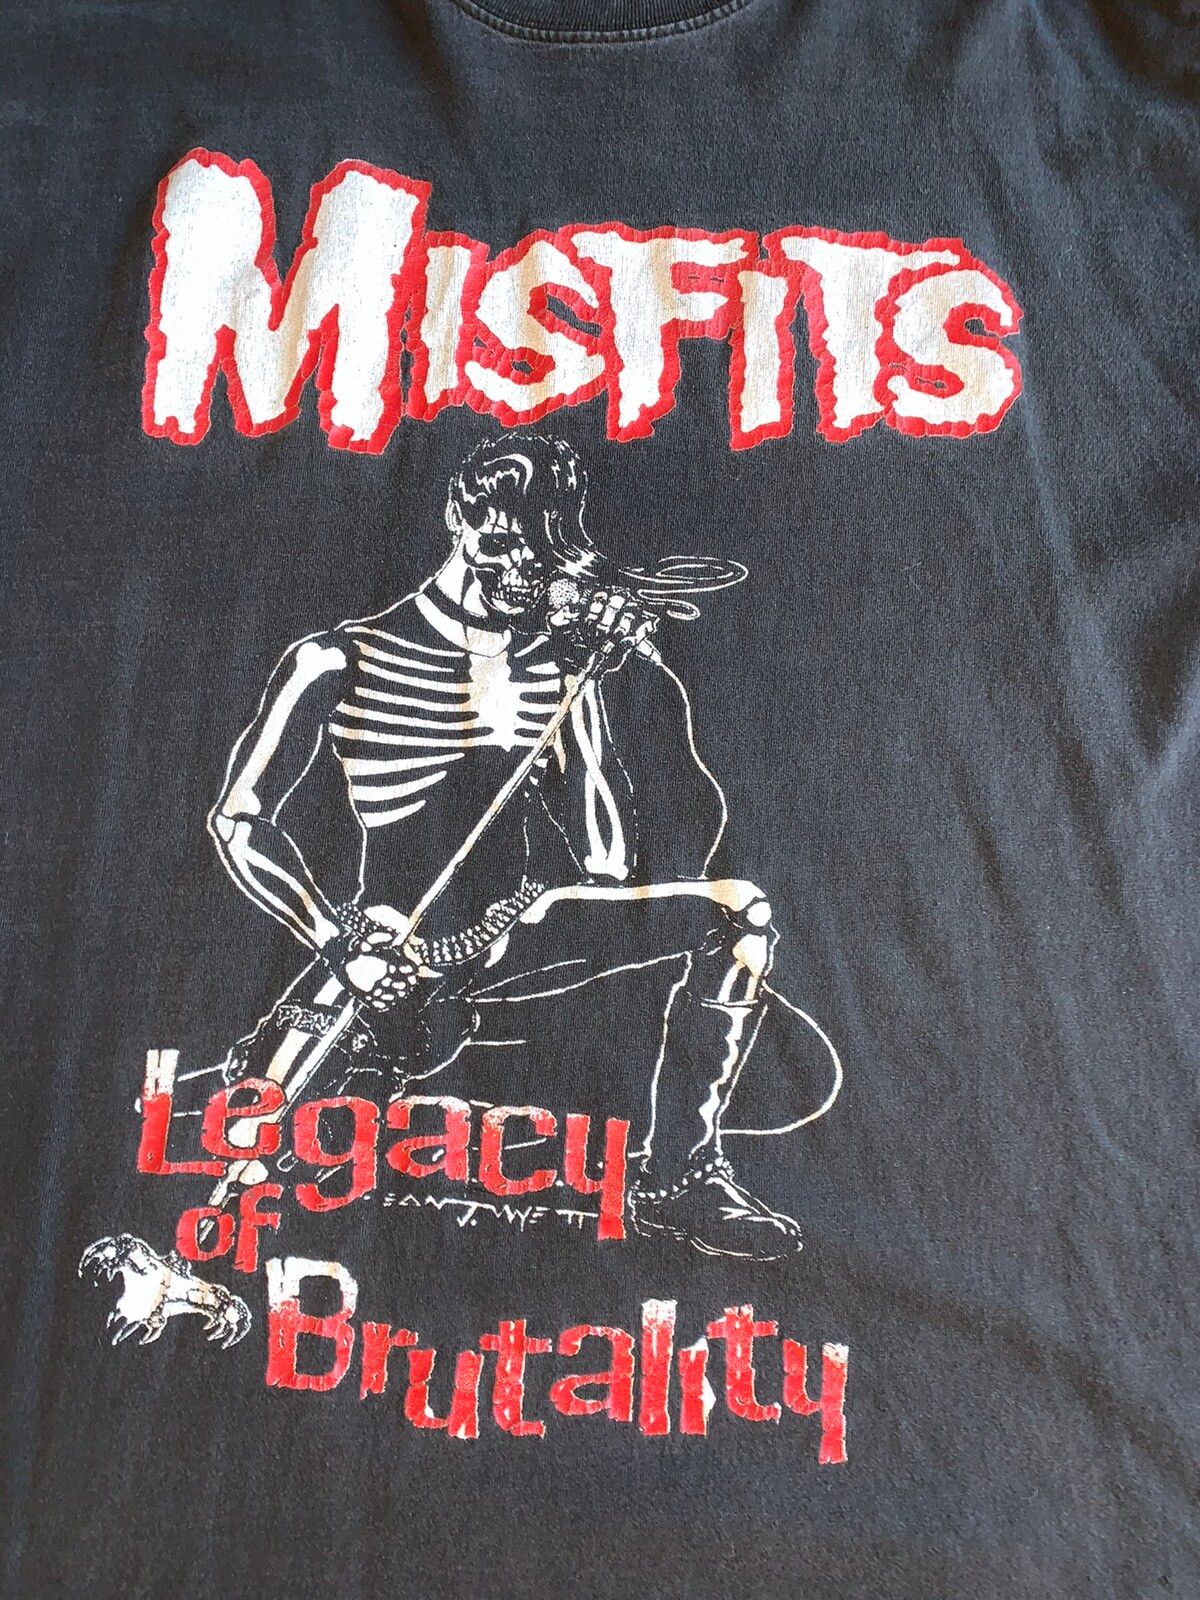 Misfits Misfits Legacy of Brutality tee Size US M / EU 48-50 / 2 - 2 Preview